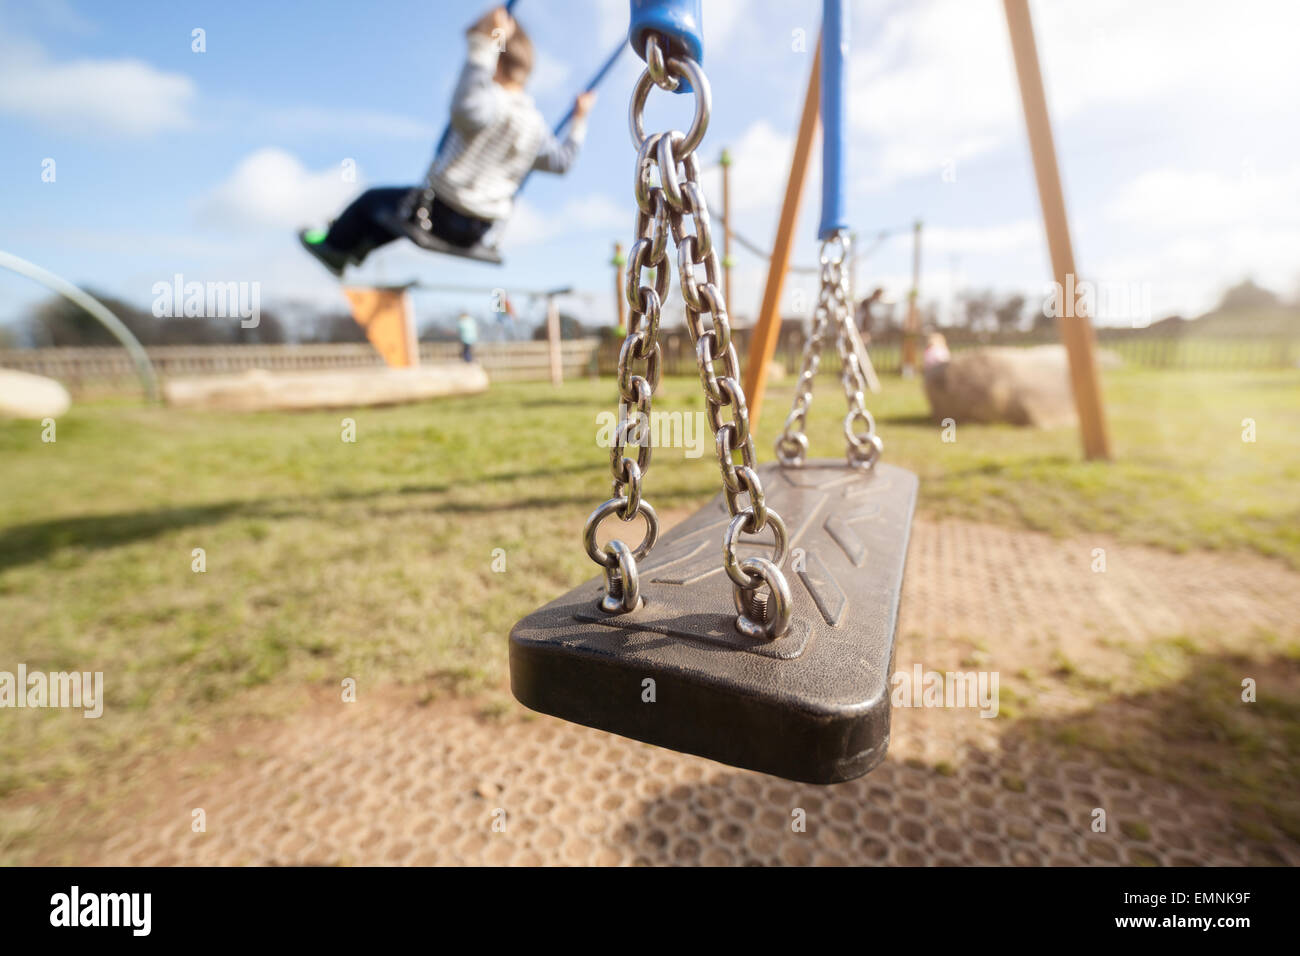 Empty playground swing with children playing in the background concept for child protection, abduction or loneliness Stock Photo